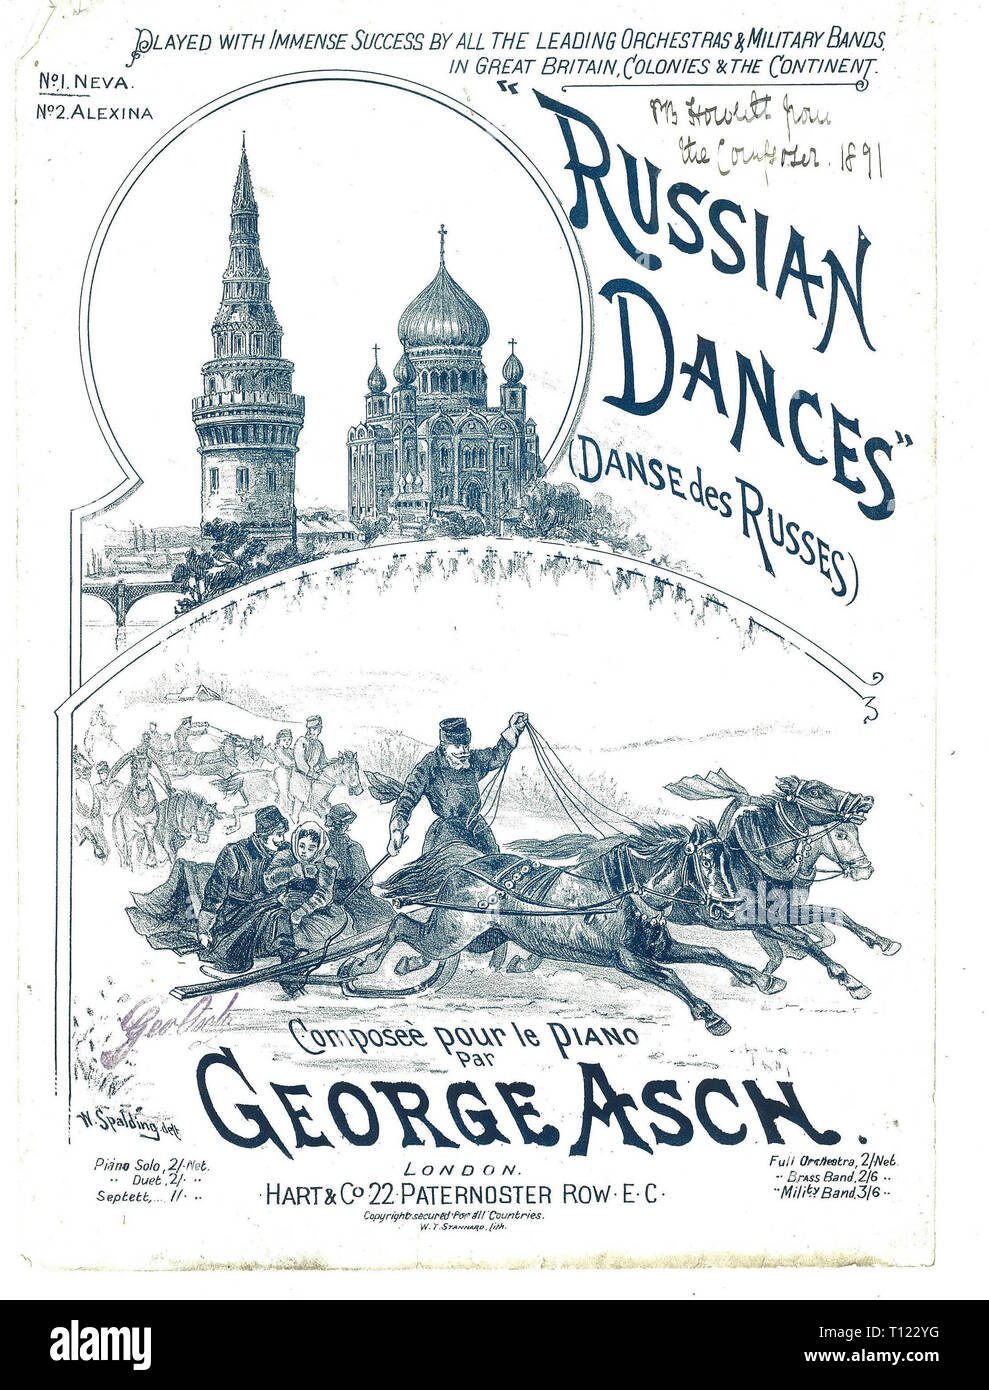 Sheet music cover for Russian Dances by George Asch, signed and dated by composer 1891 Stock Photo